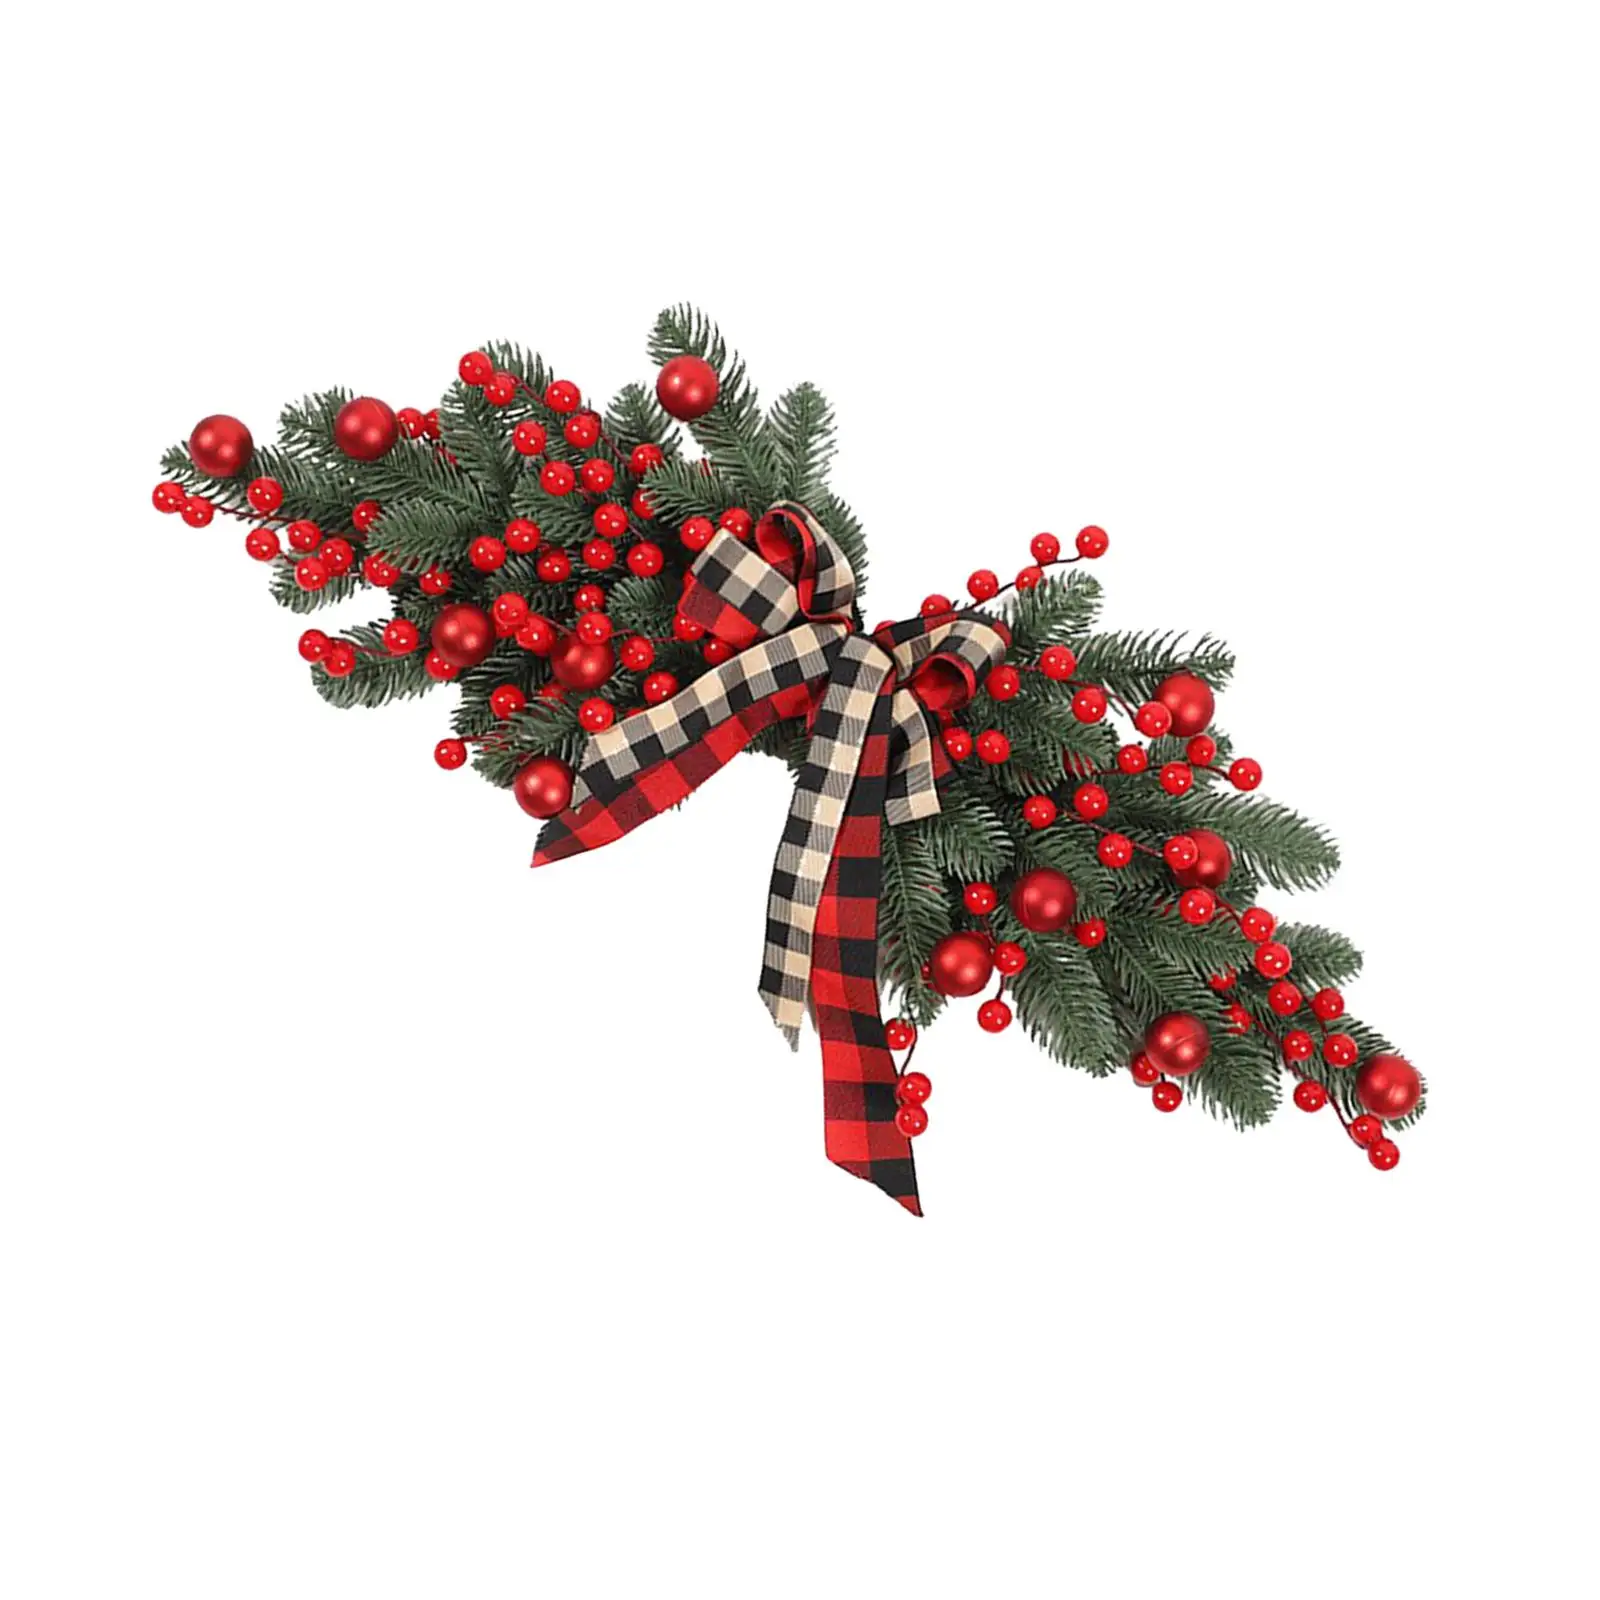 Christmas Wreath Artificial Red Berries Holiday Rustic Centerpiece Decor